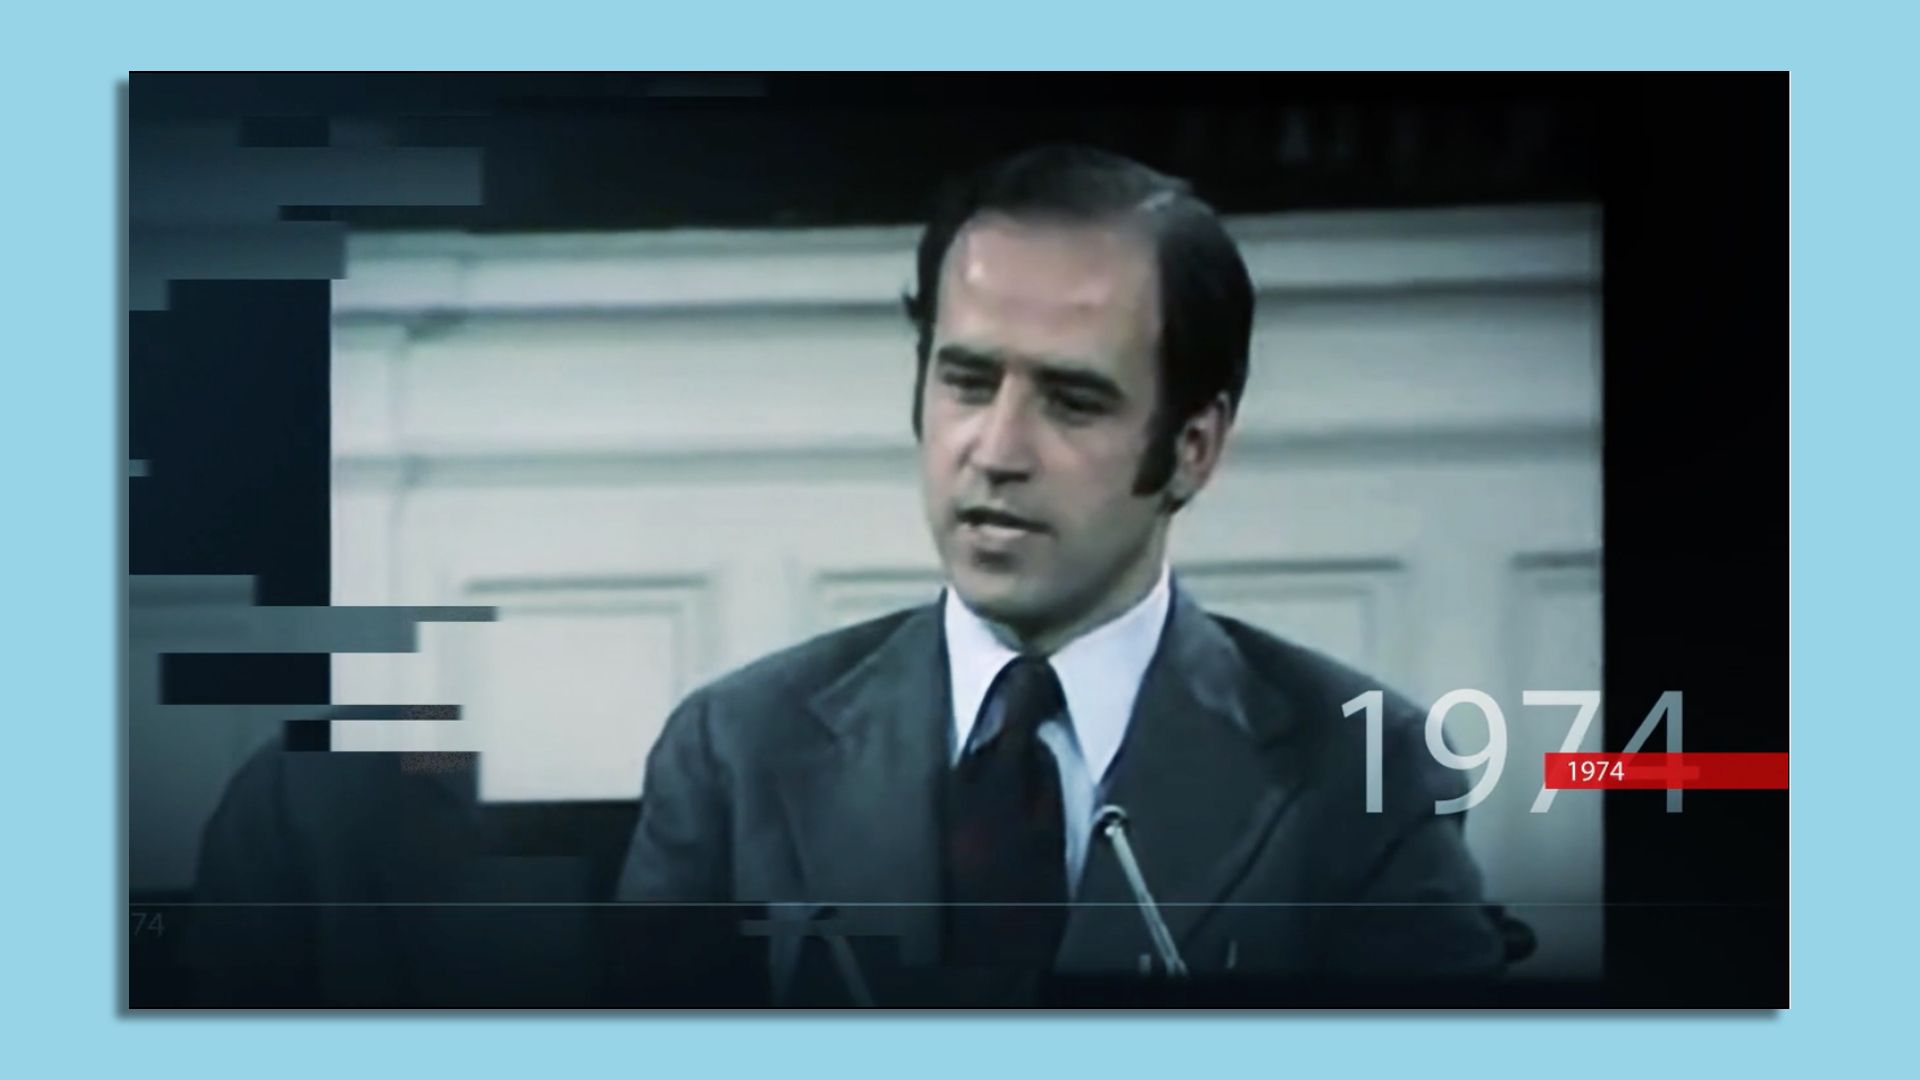 President Biden is seen speaking about bipartisanship in 1974 as part of a new ad campaign.